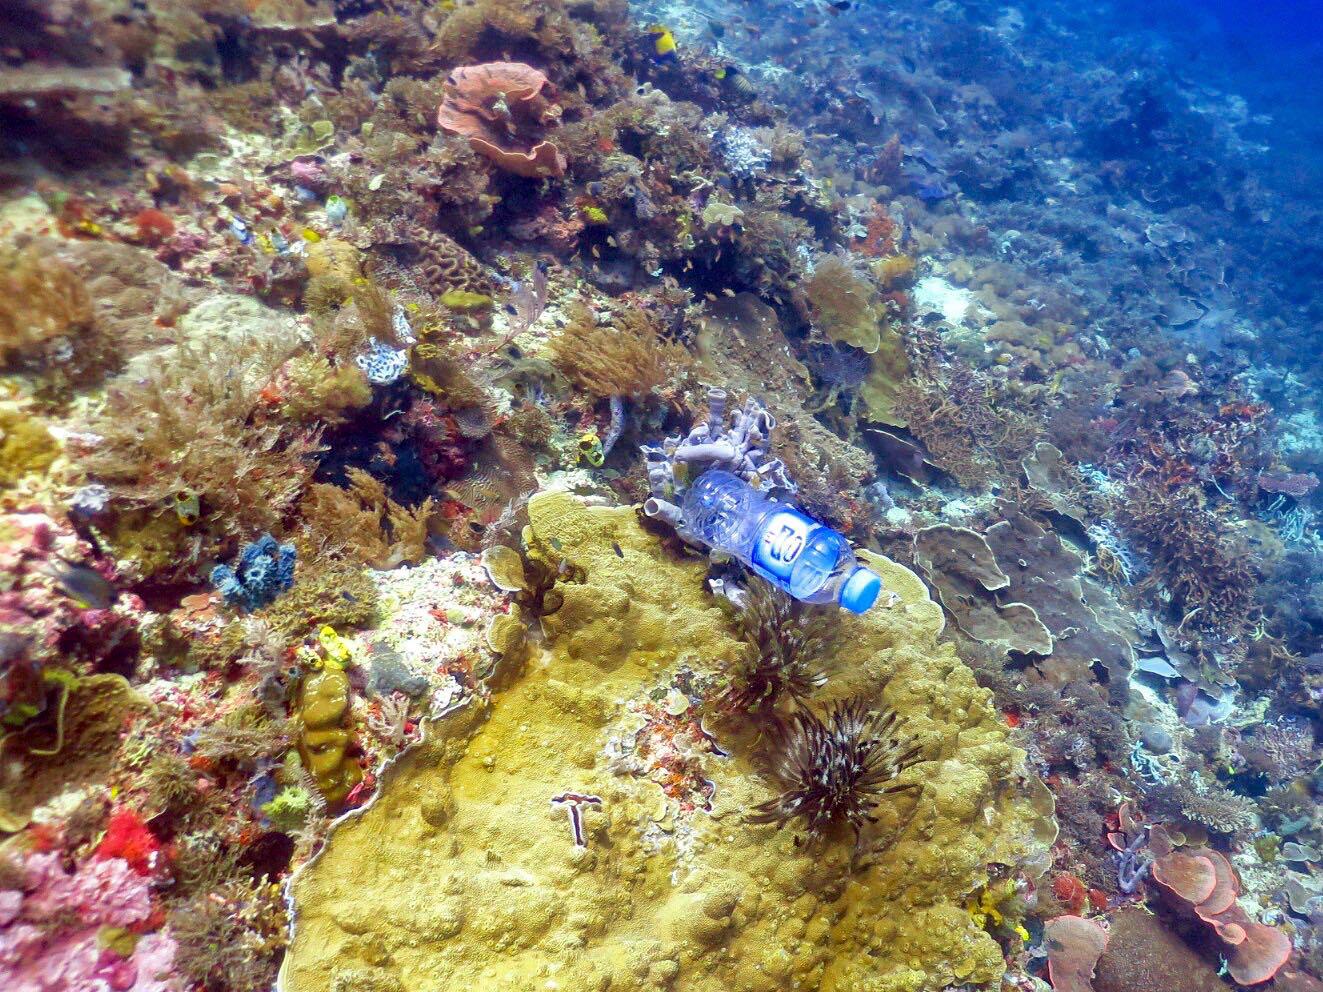 Scientists studying reefs in the Asia-Pacific region found that corals were far more likely to be diseased if they were in contact with plastic